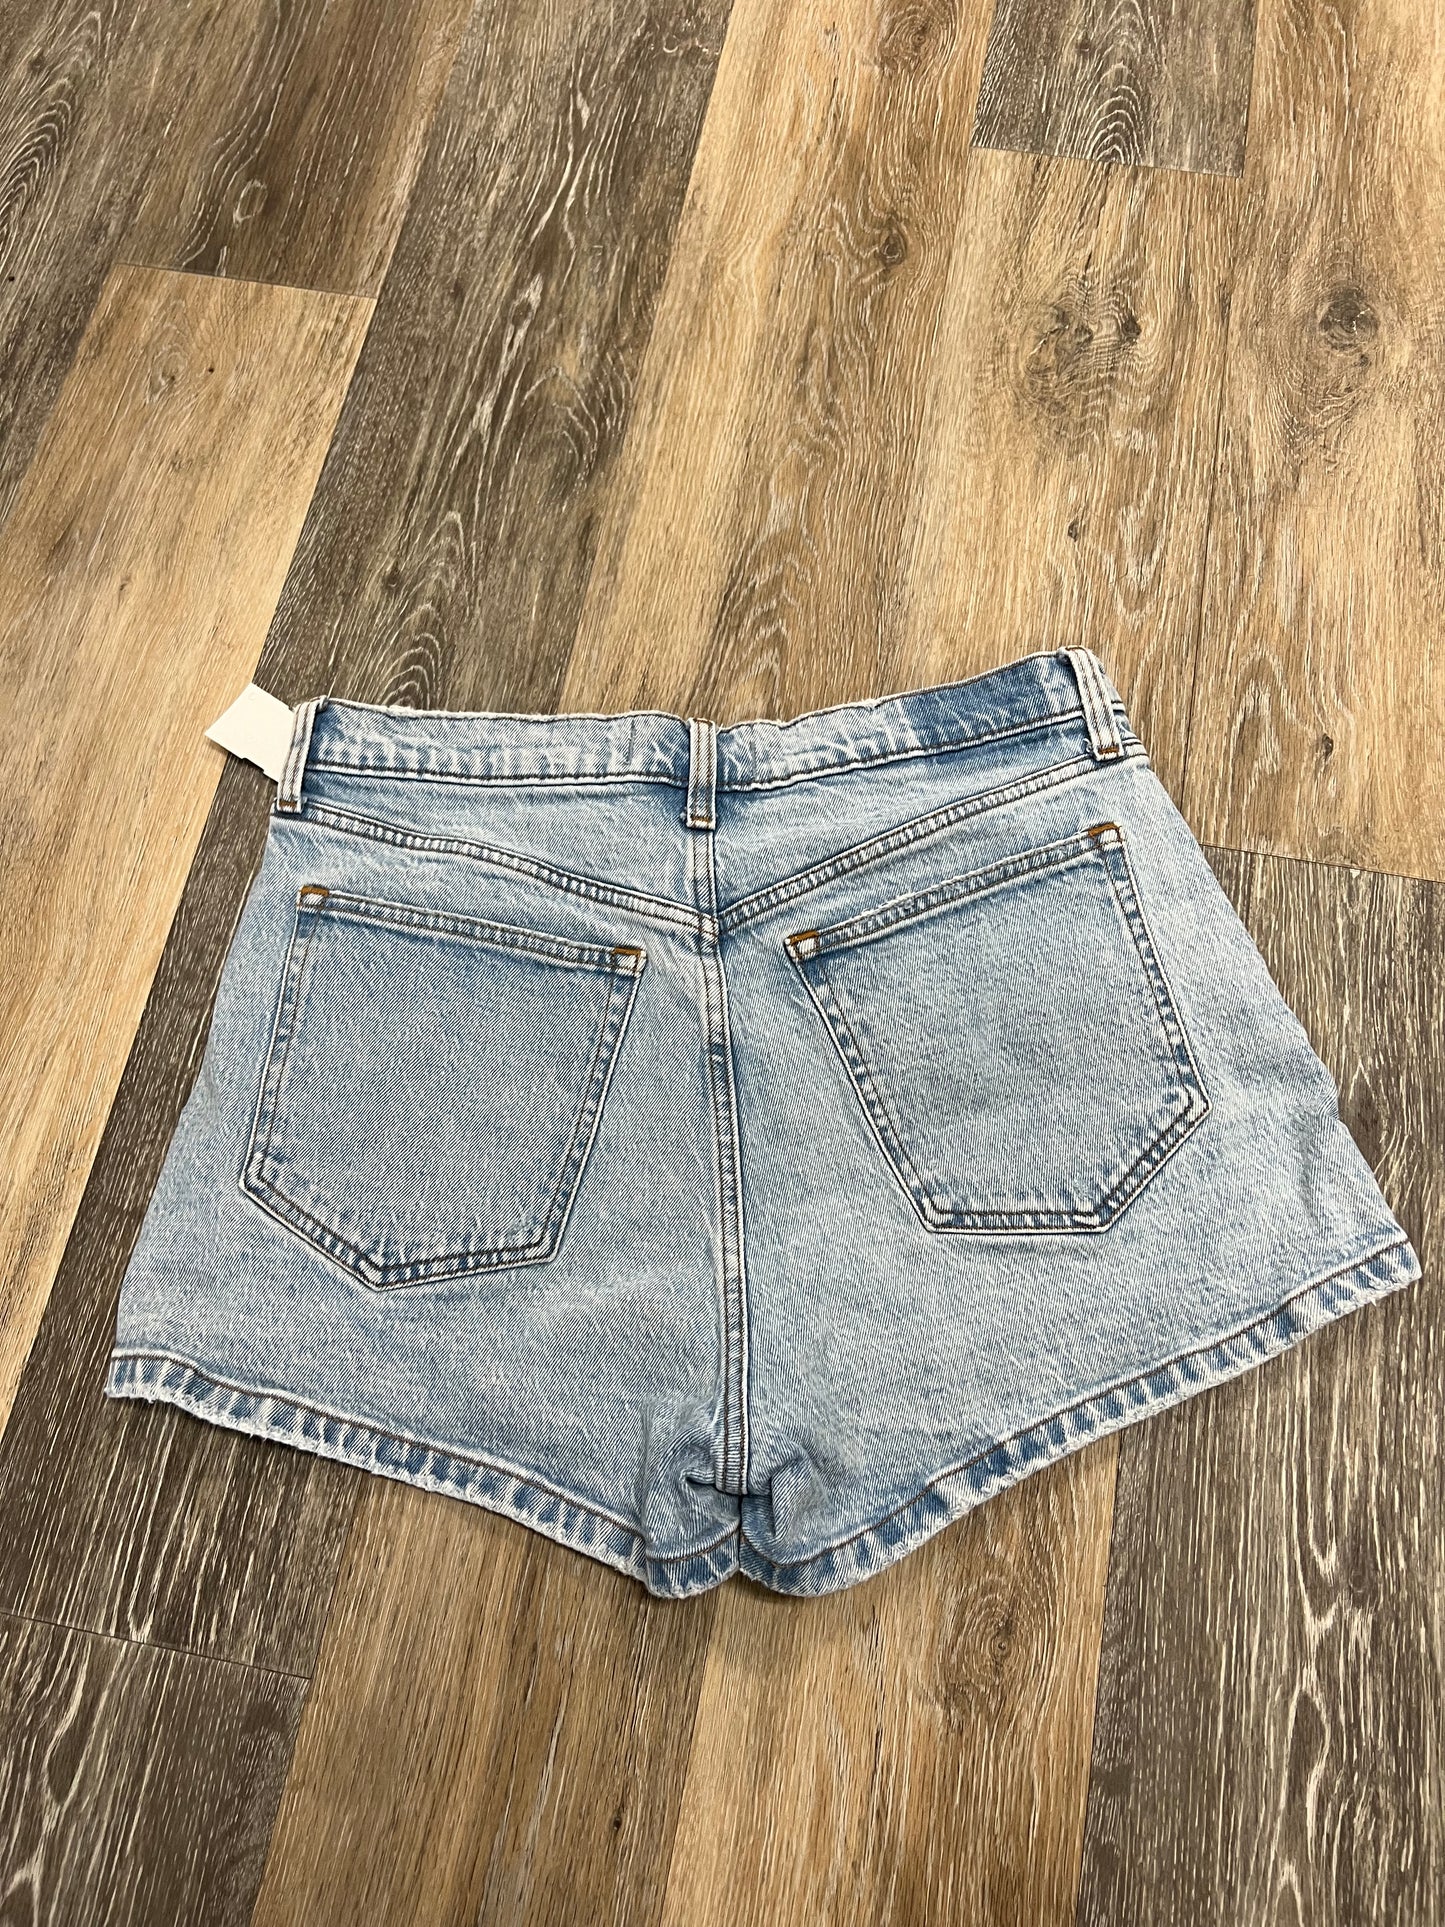 Shorts By Abercrombie And Fitch  Size: 8/29